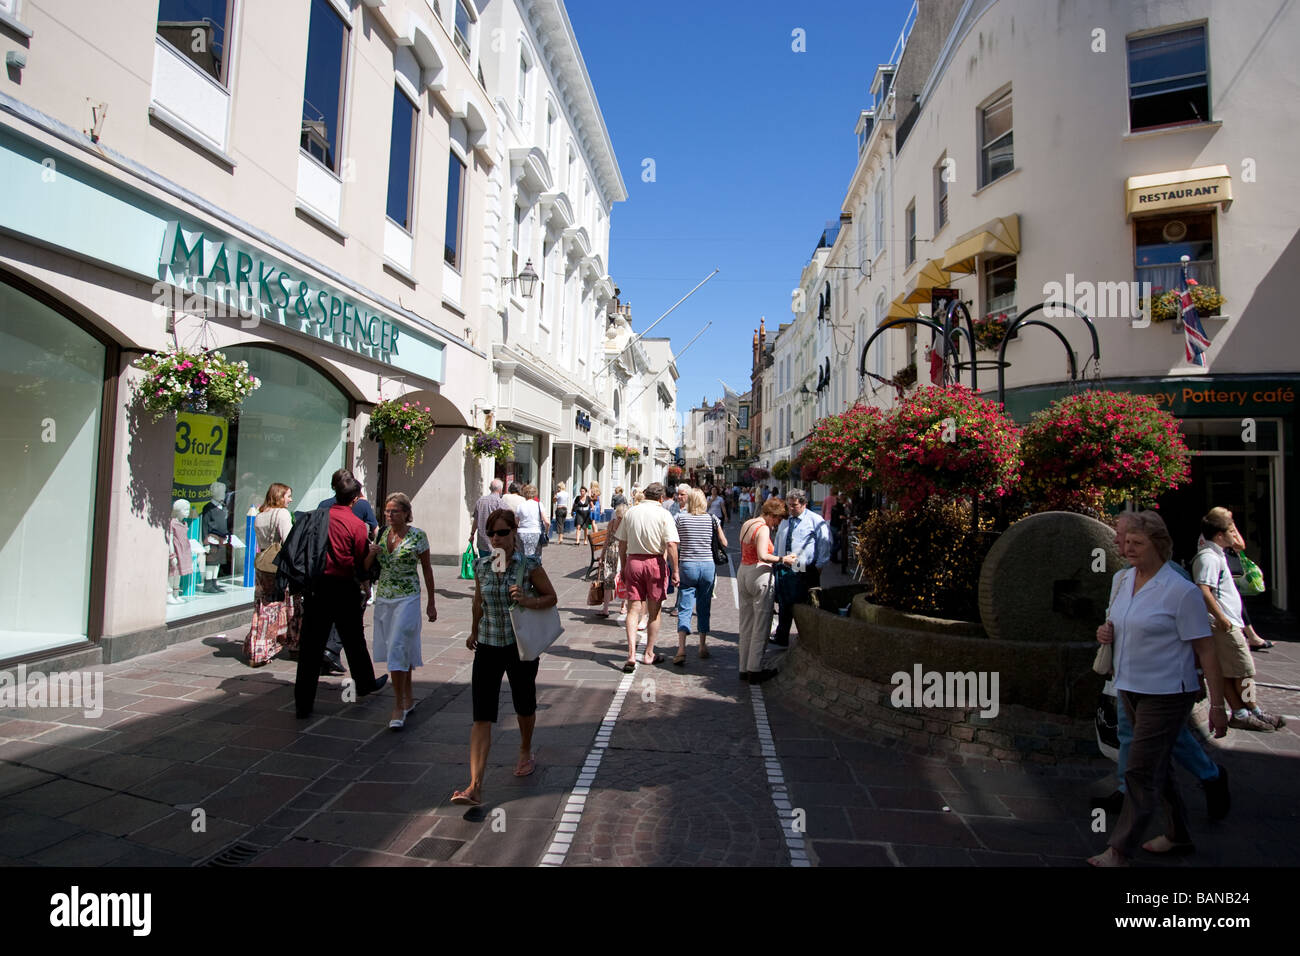 Shopping centre of St Helier capital of 